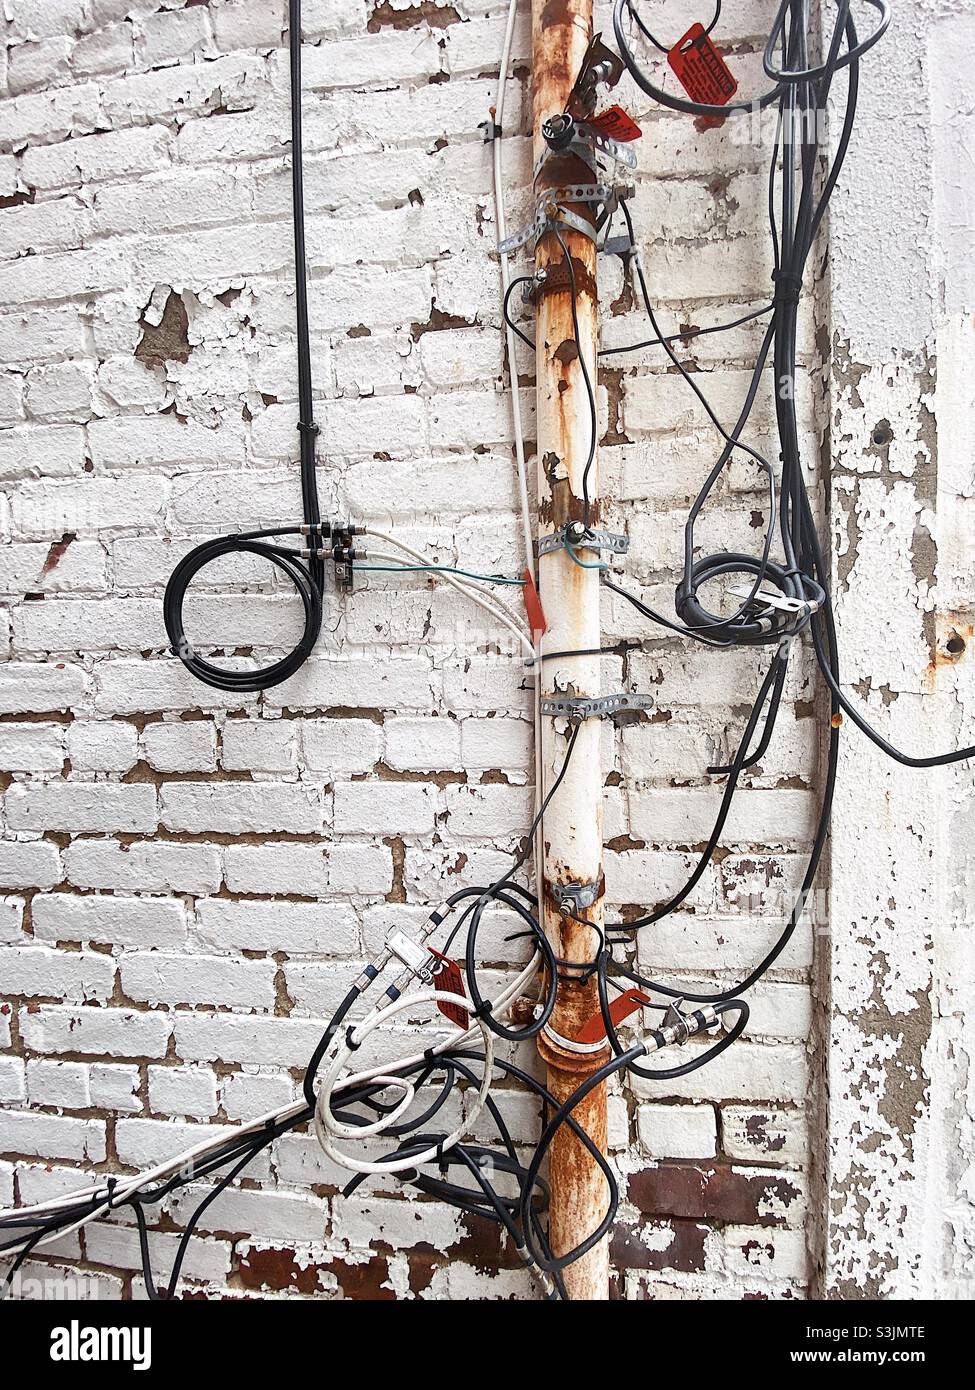 Tangled electrical wires and pipes in an old white exterior wall Stock Photo